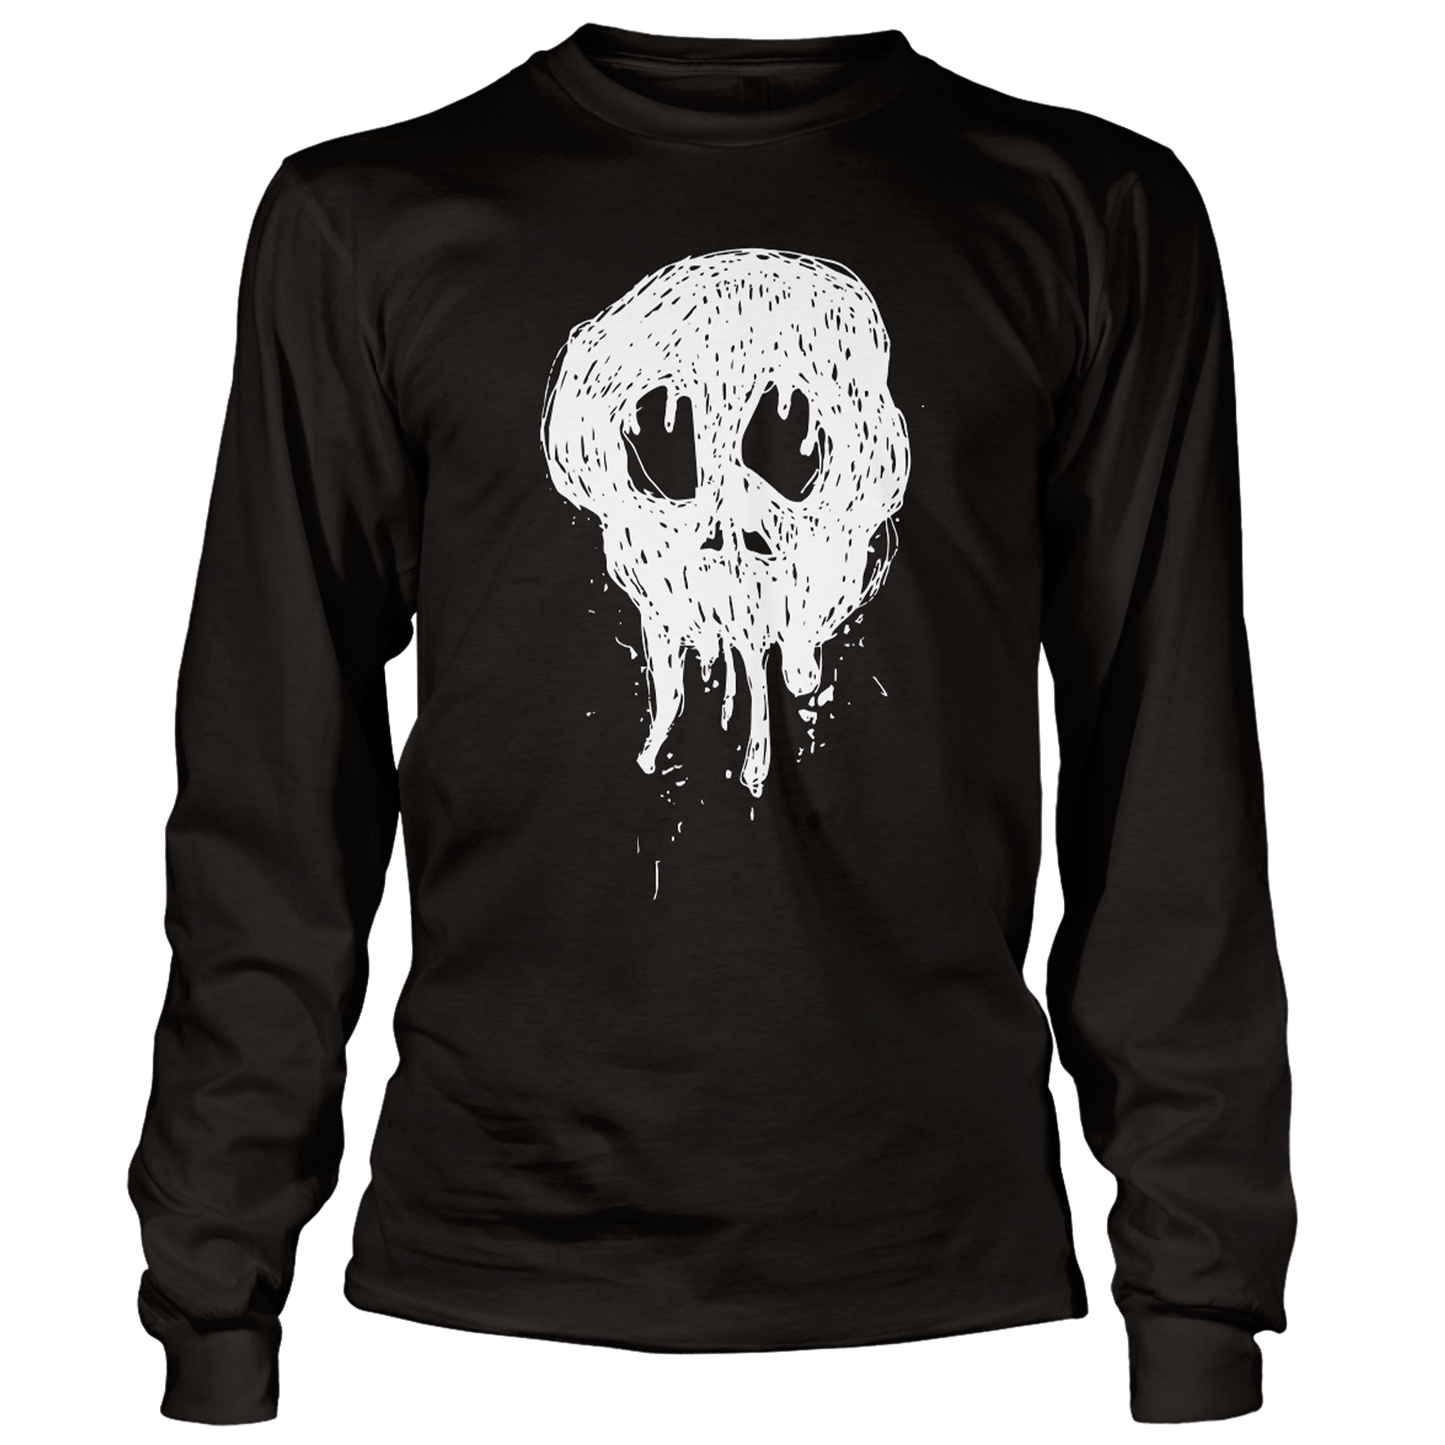 Limited Edition Jan 21 Long Sleeve Shirt - Hand Drawn by Ace | Skunk Anansie Official Store